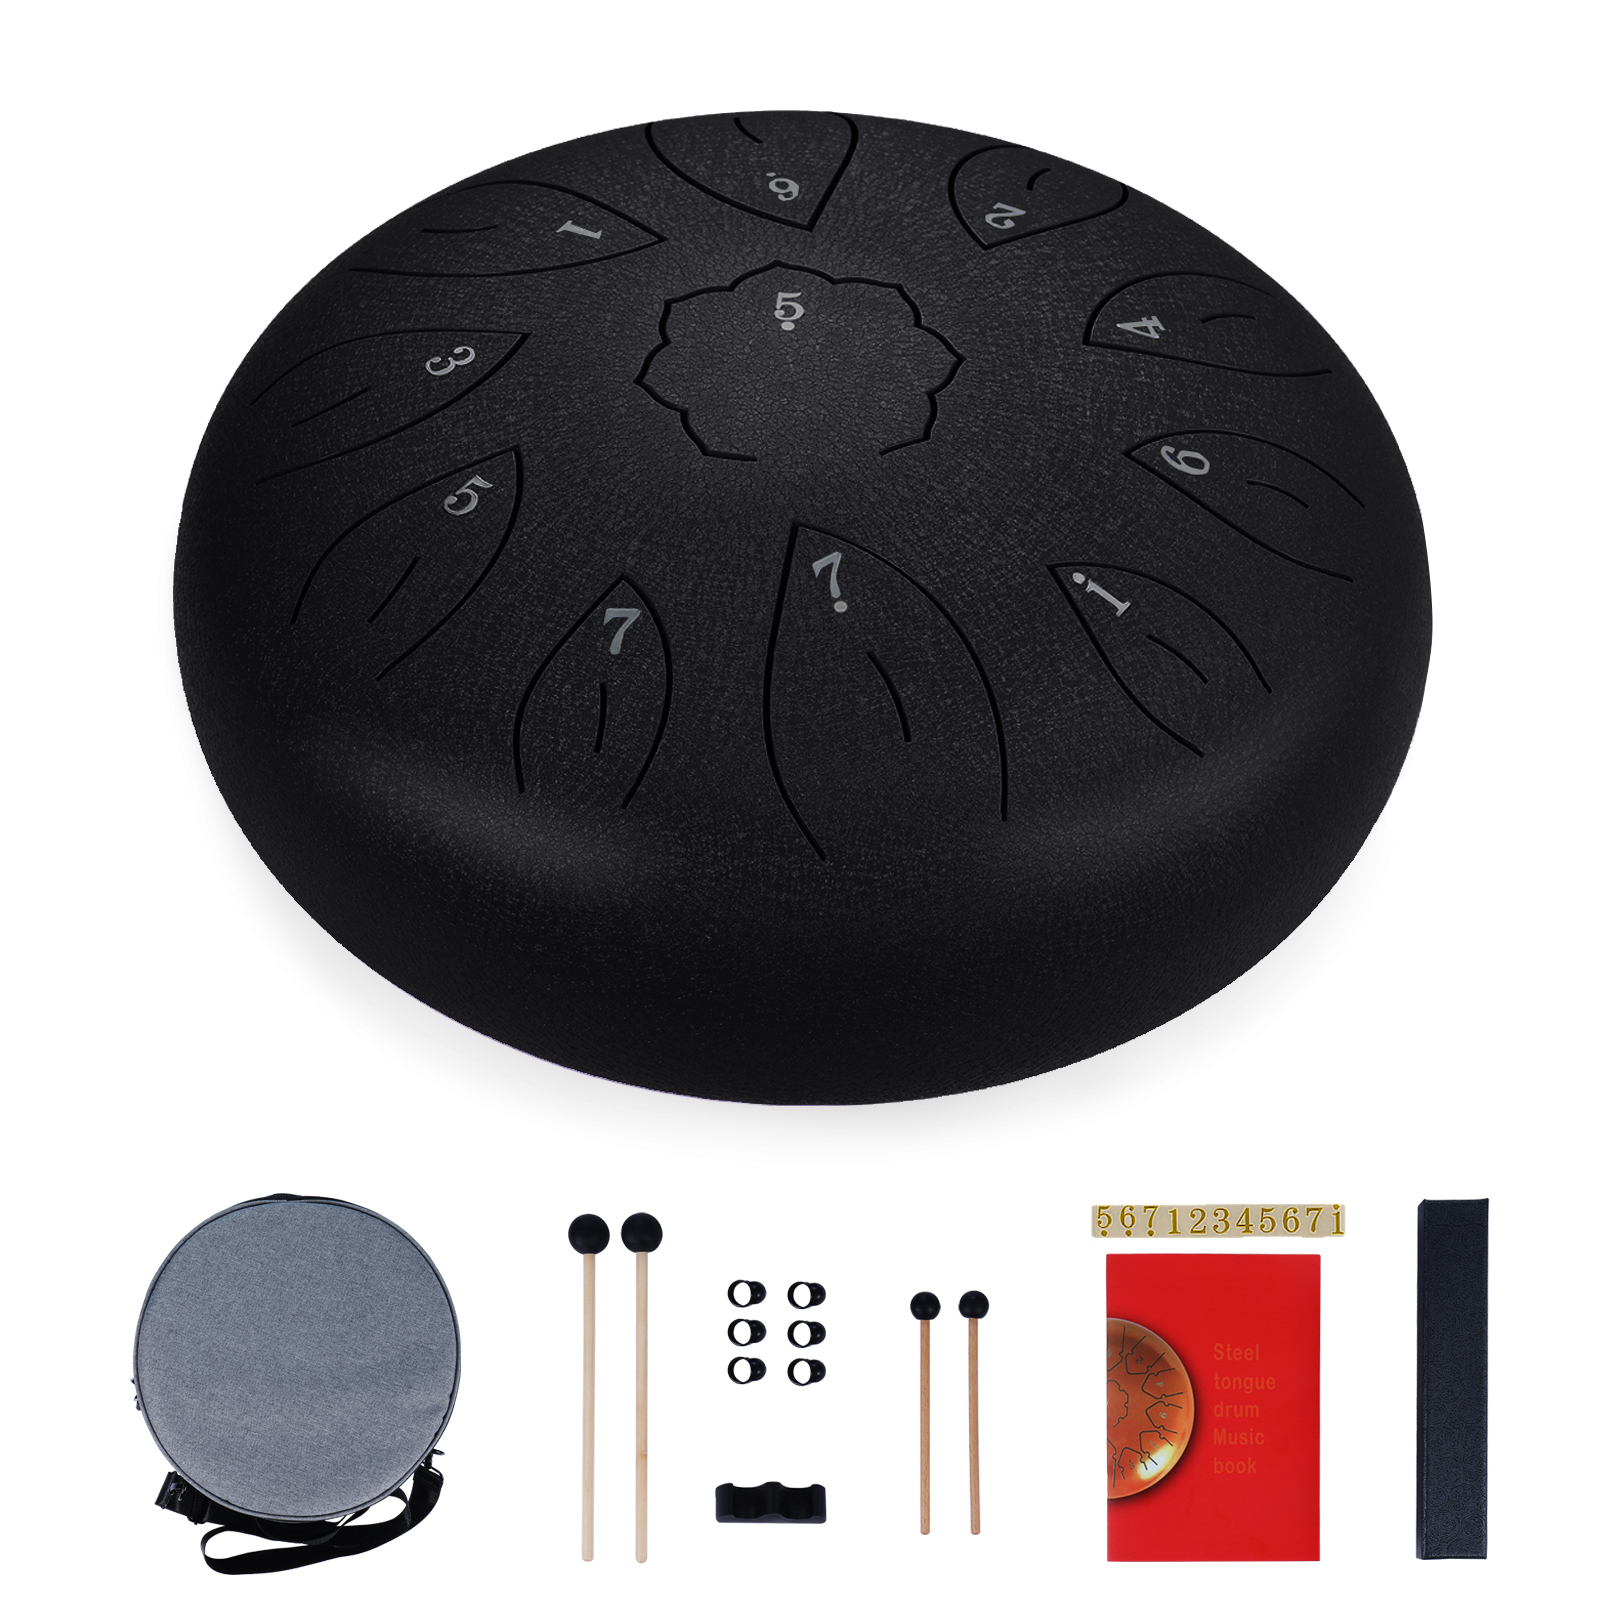 High Quality Steel Tongue Drum 7 Inch 11 Notes Handpan Musical